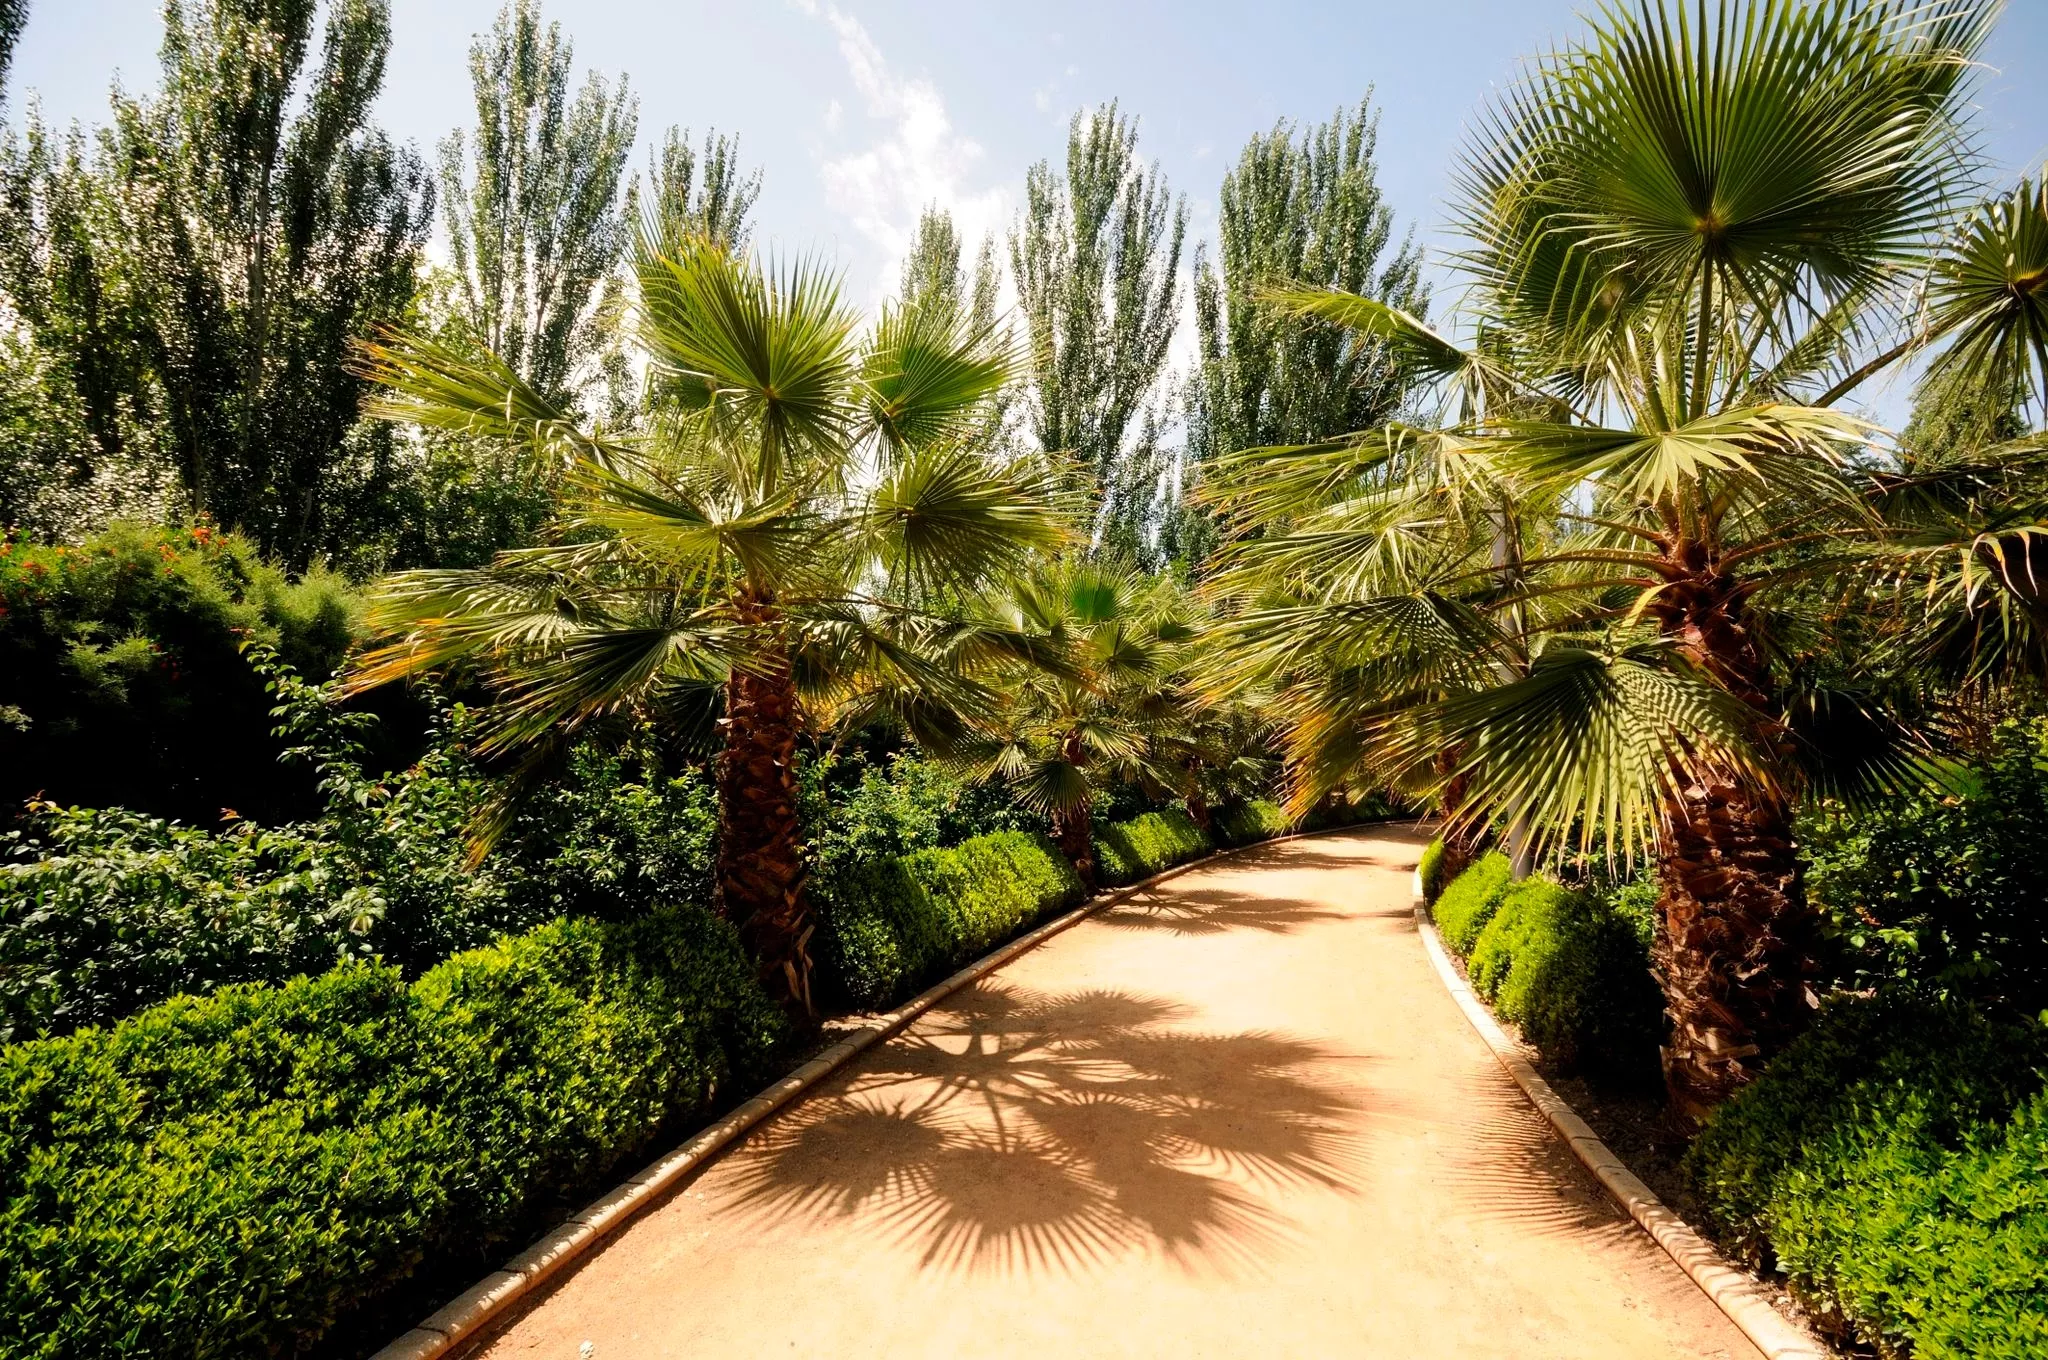 Federico Garcia Lorca Park in Spain, Europe | Parks - Rated 3.8